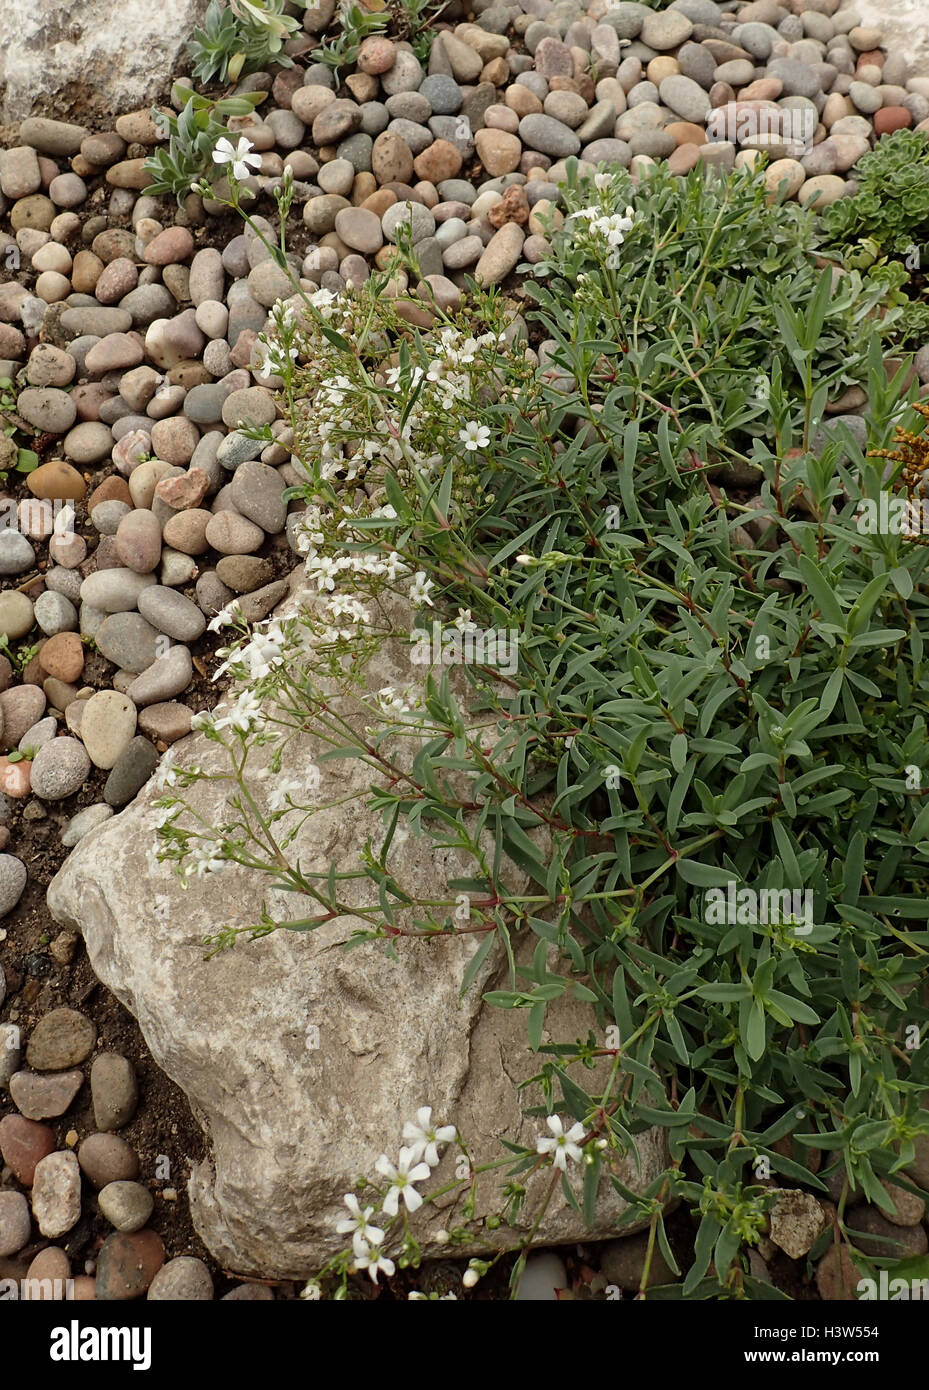 Creeping gypsophila (Gypsophila repens 'filou white') in a rockery in a bed of small pebbles Stock Photo